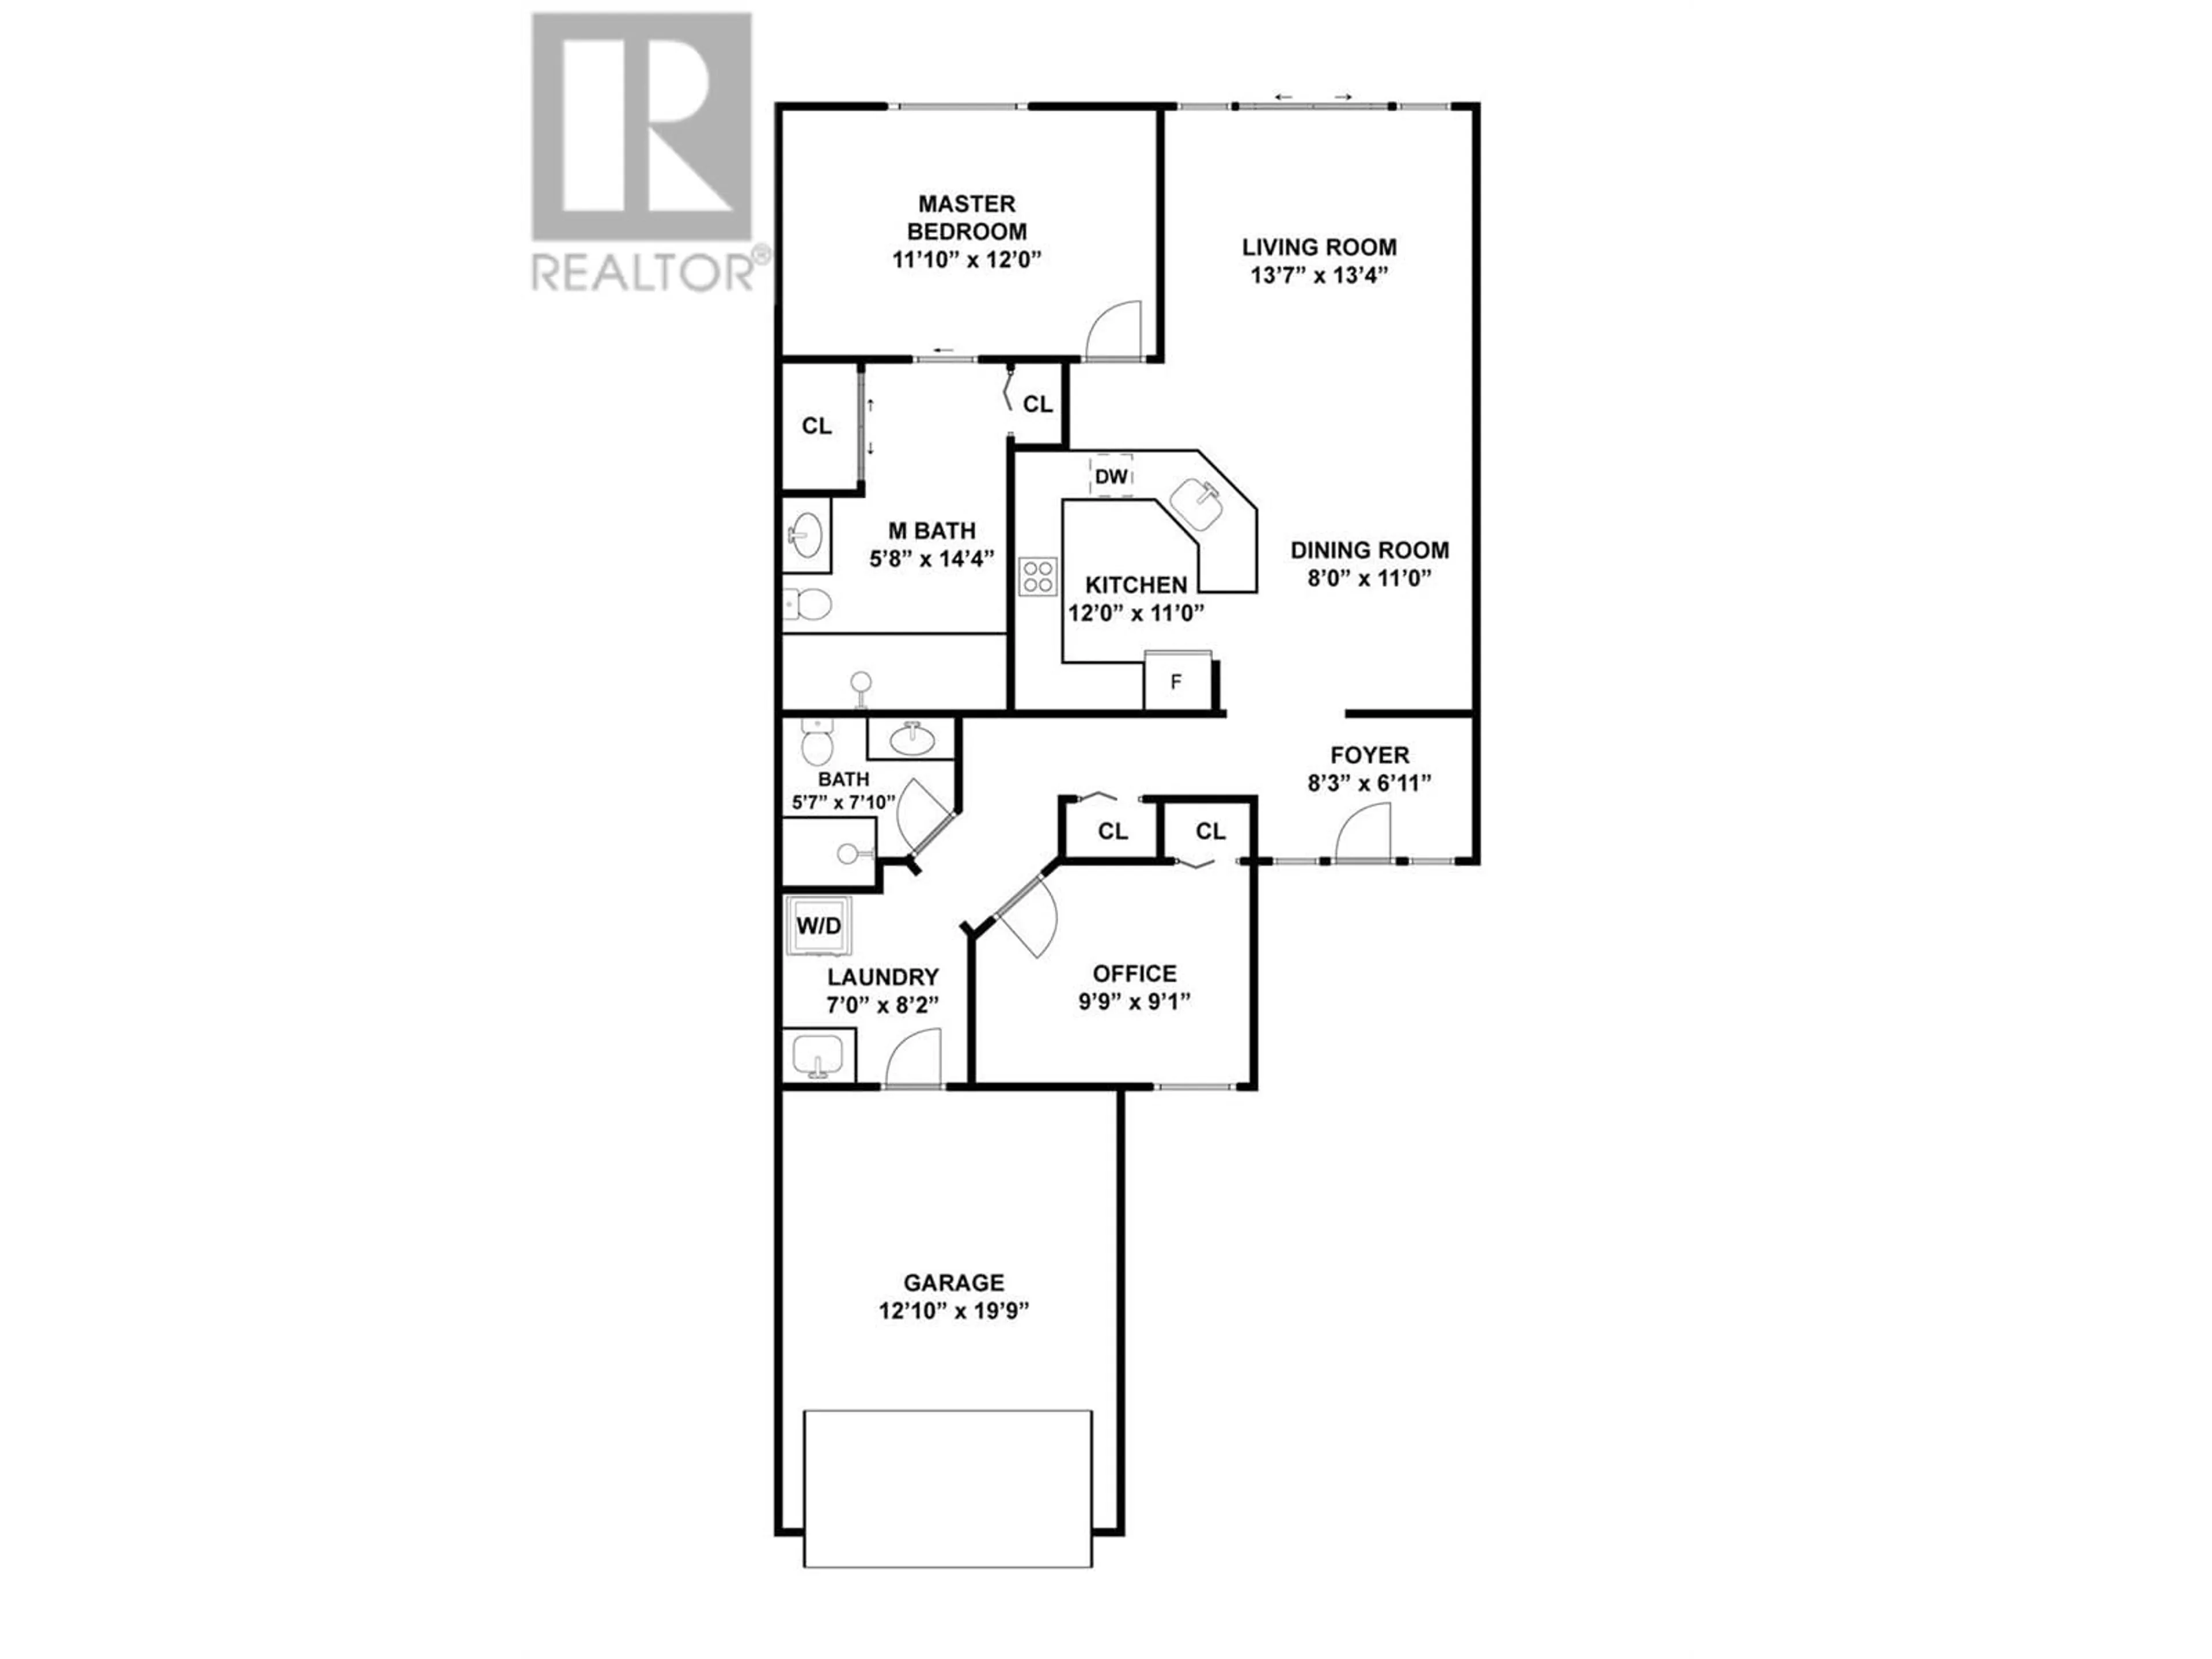 Floor plan for 3847 Sonoma Pines Drive, West Kelowna British Columbia V4T2Z5